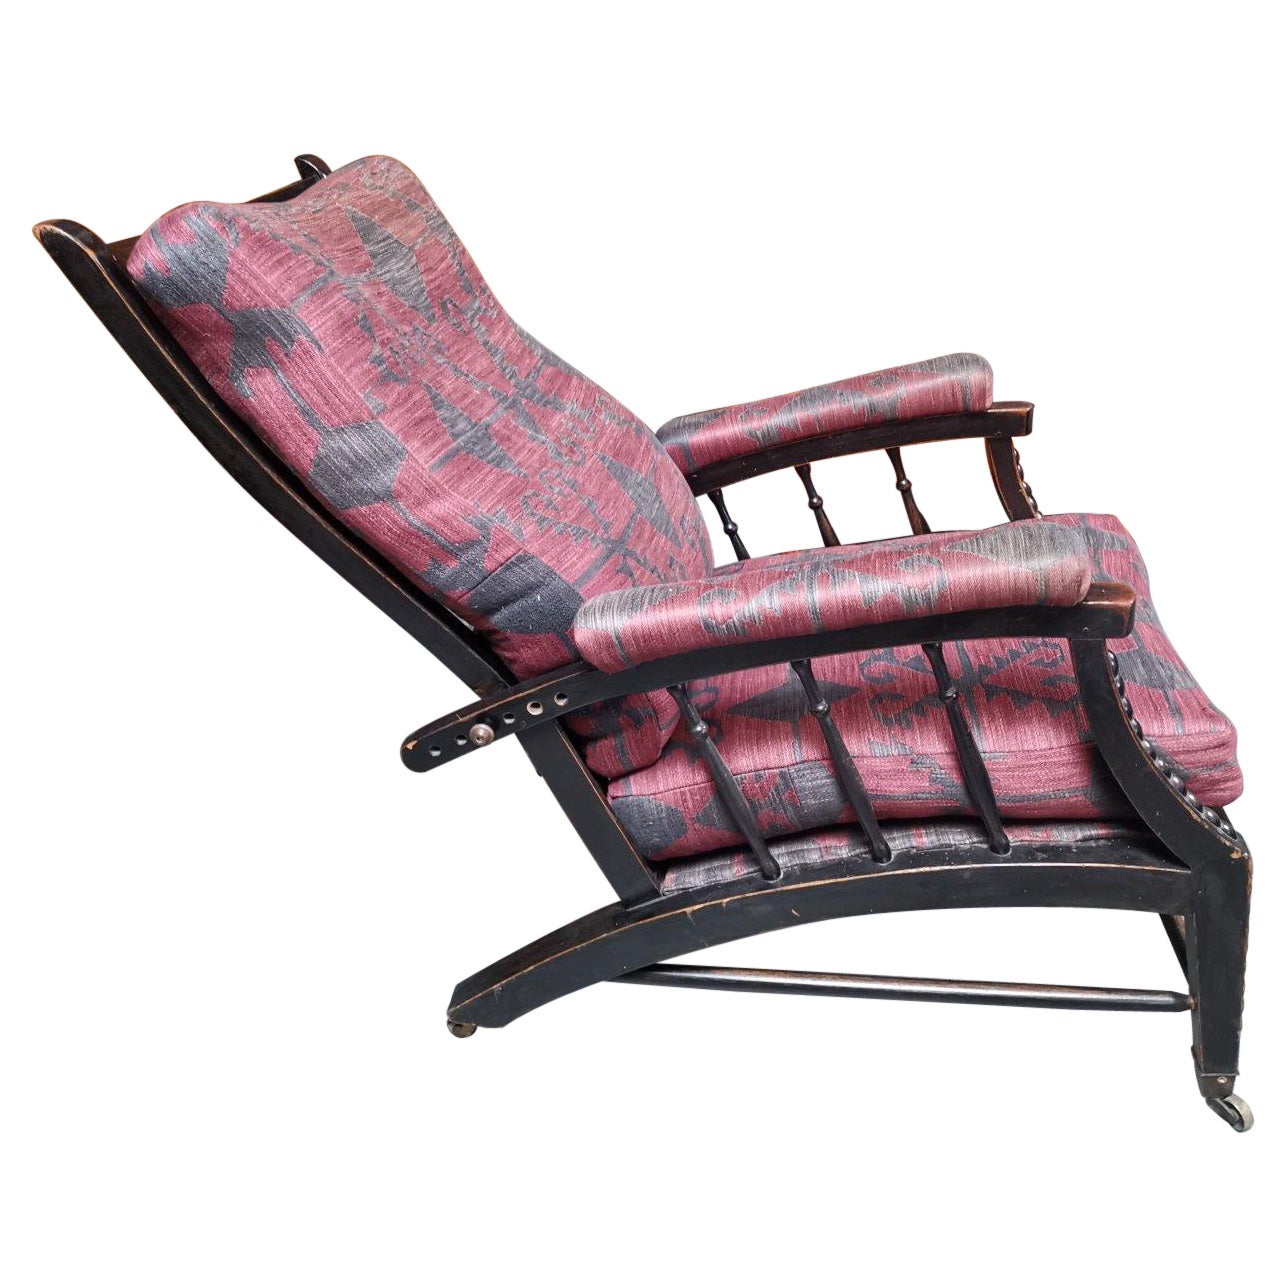 Phillip Webb for Morris & Co. an English Aesthetic Movement Reclining Armchair